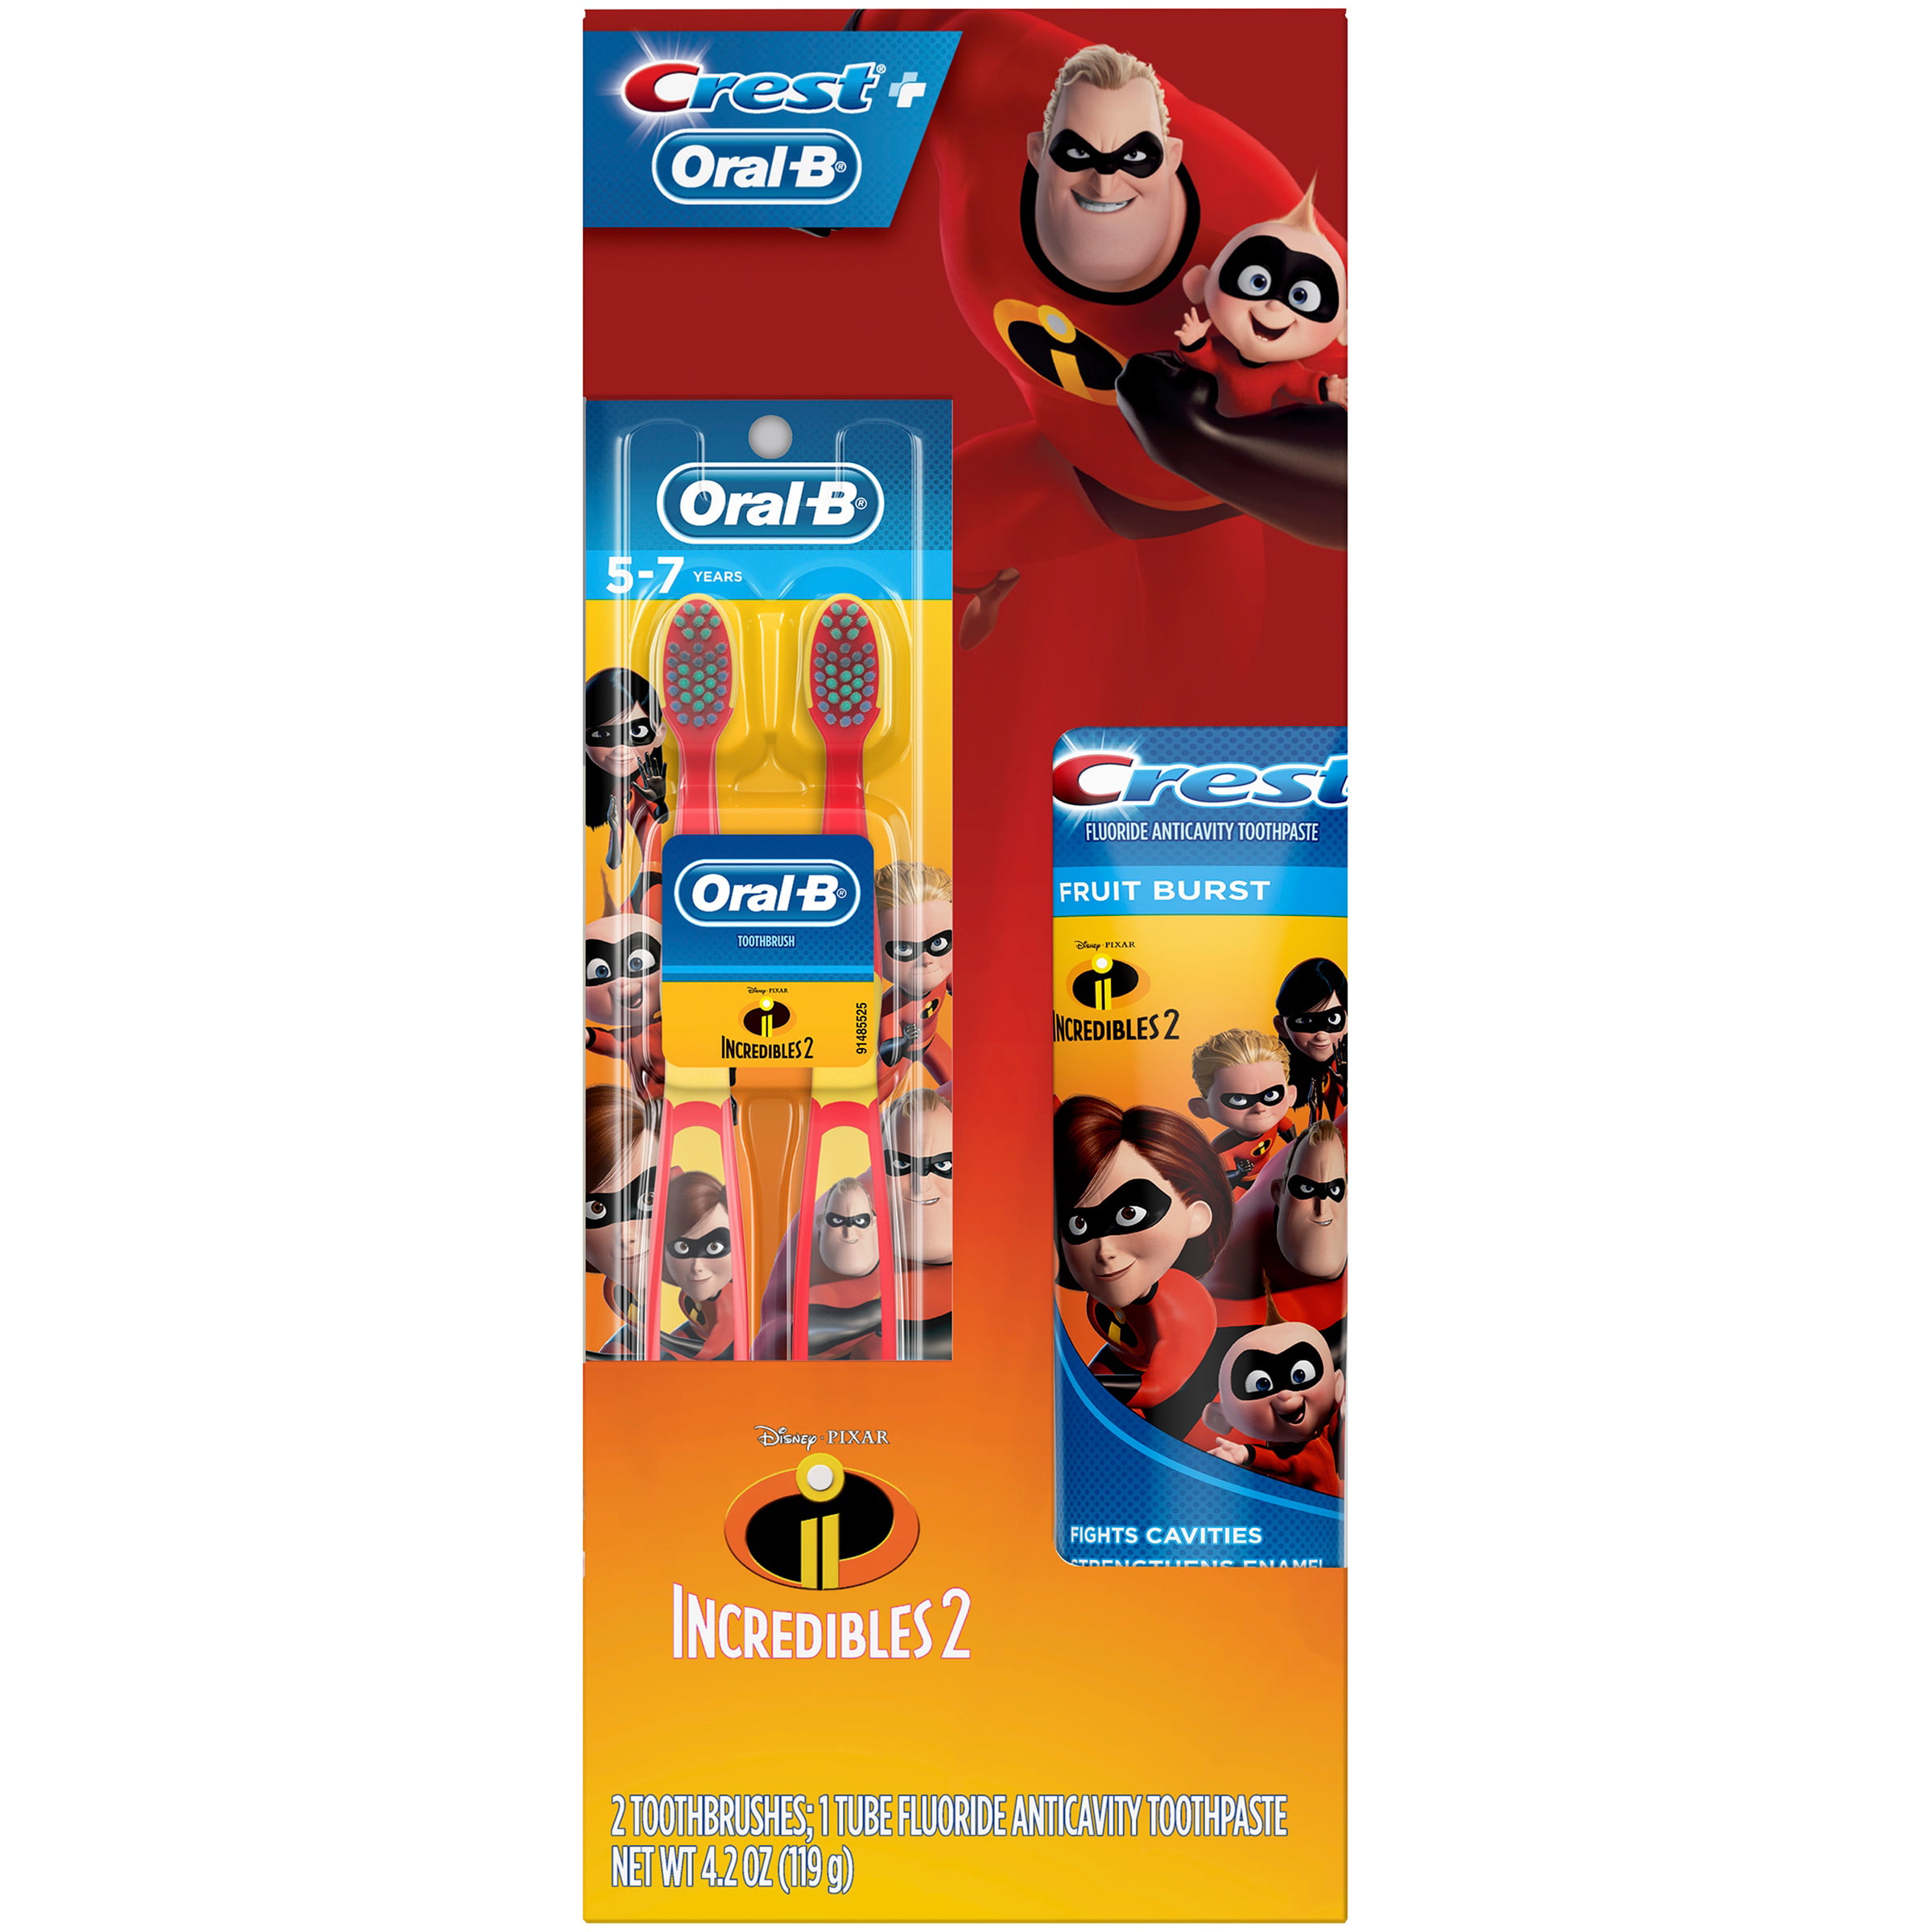 crest-oral-b-kids-holiday-gift-pack-with-toothbrushes-and-toothpaste